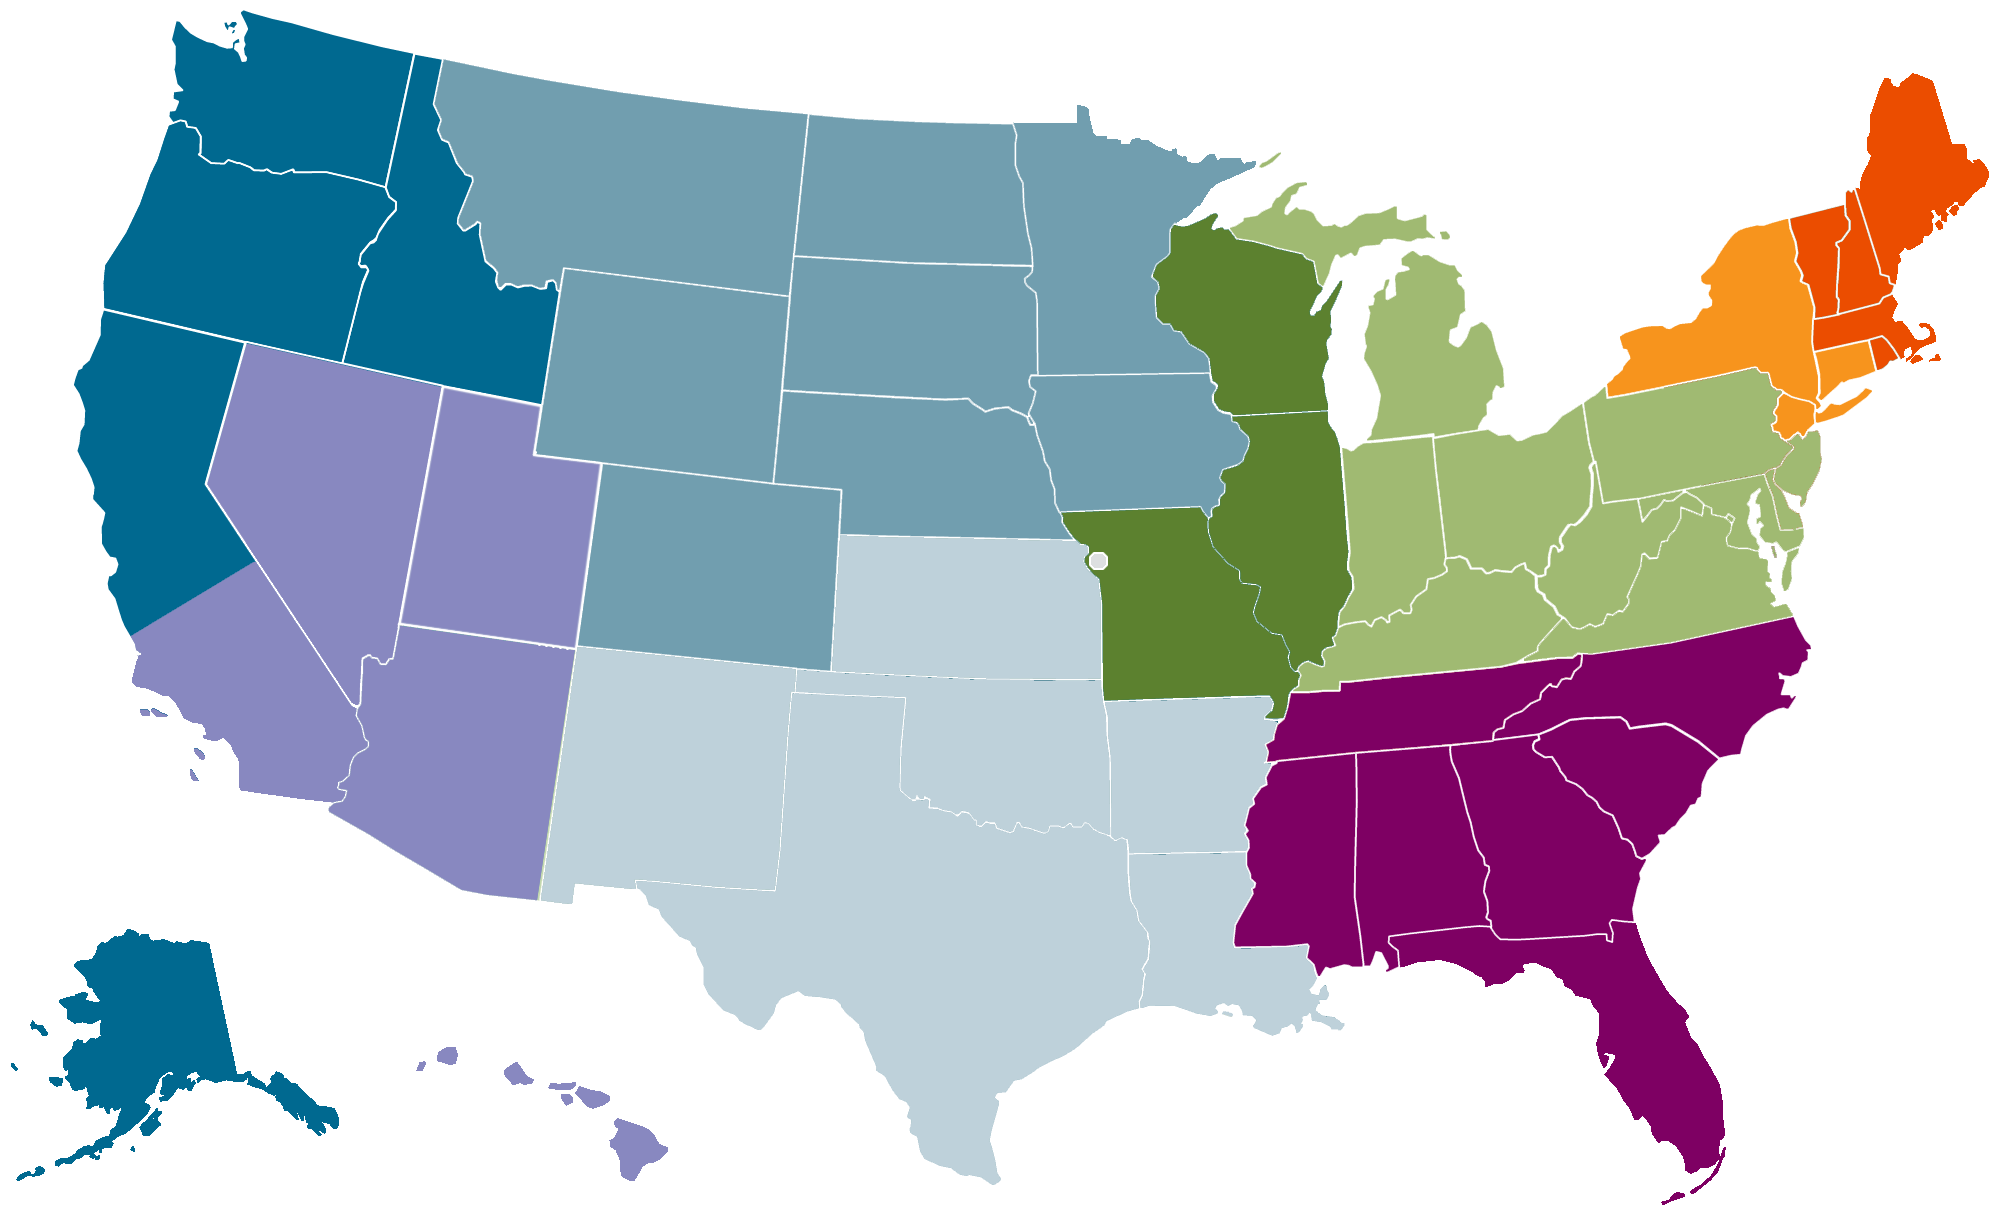 Map showing the Fidelity Charitable regional experts across the United States